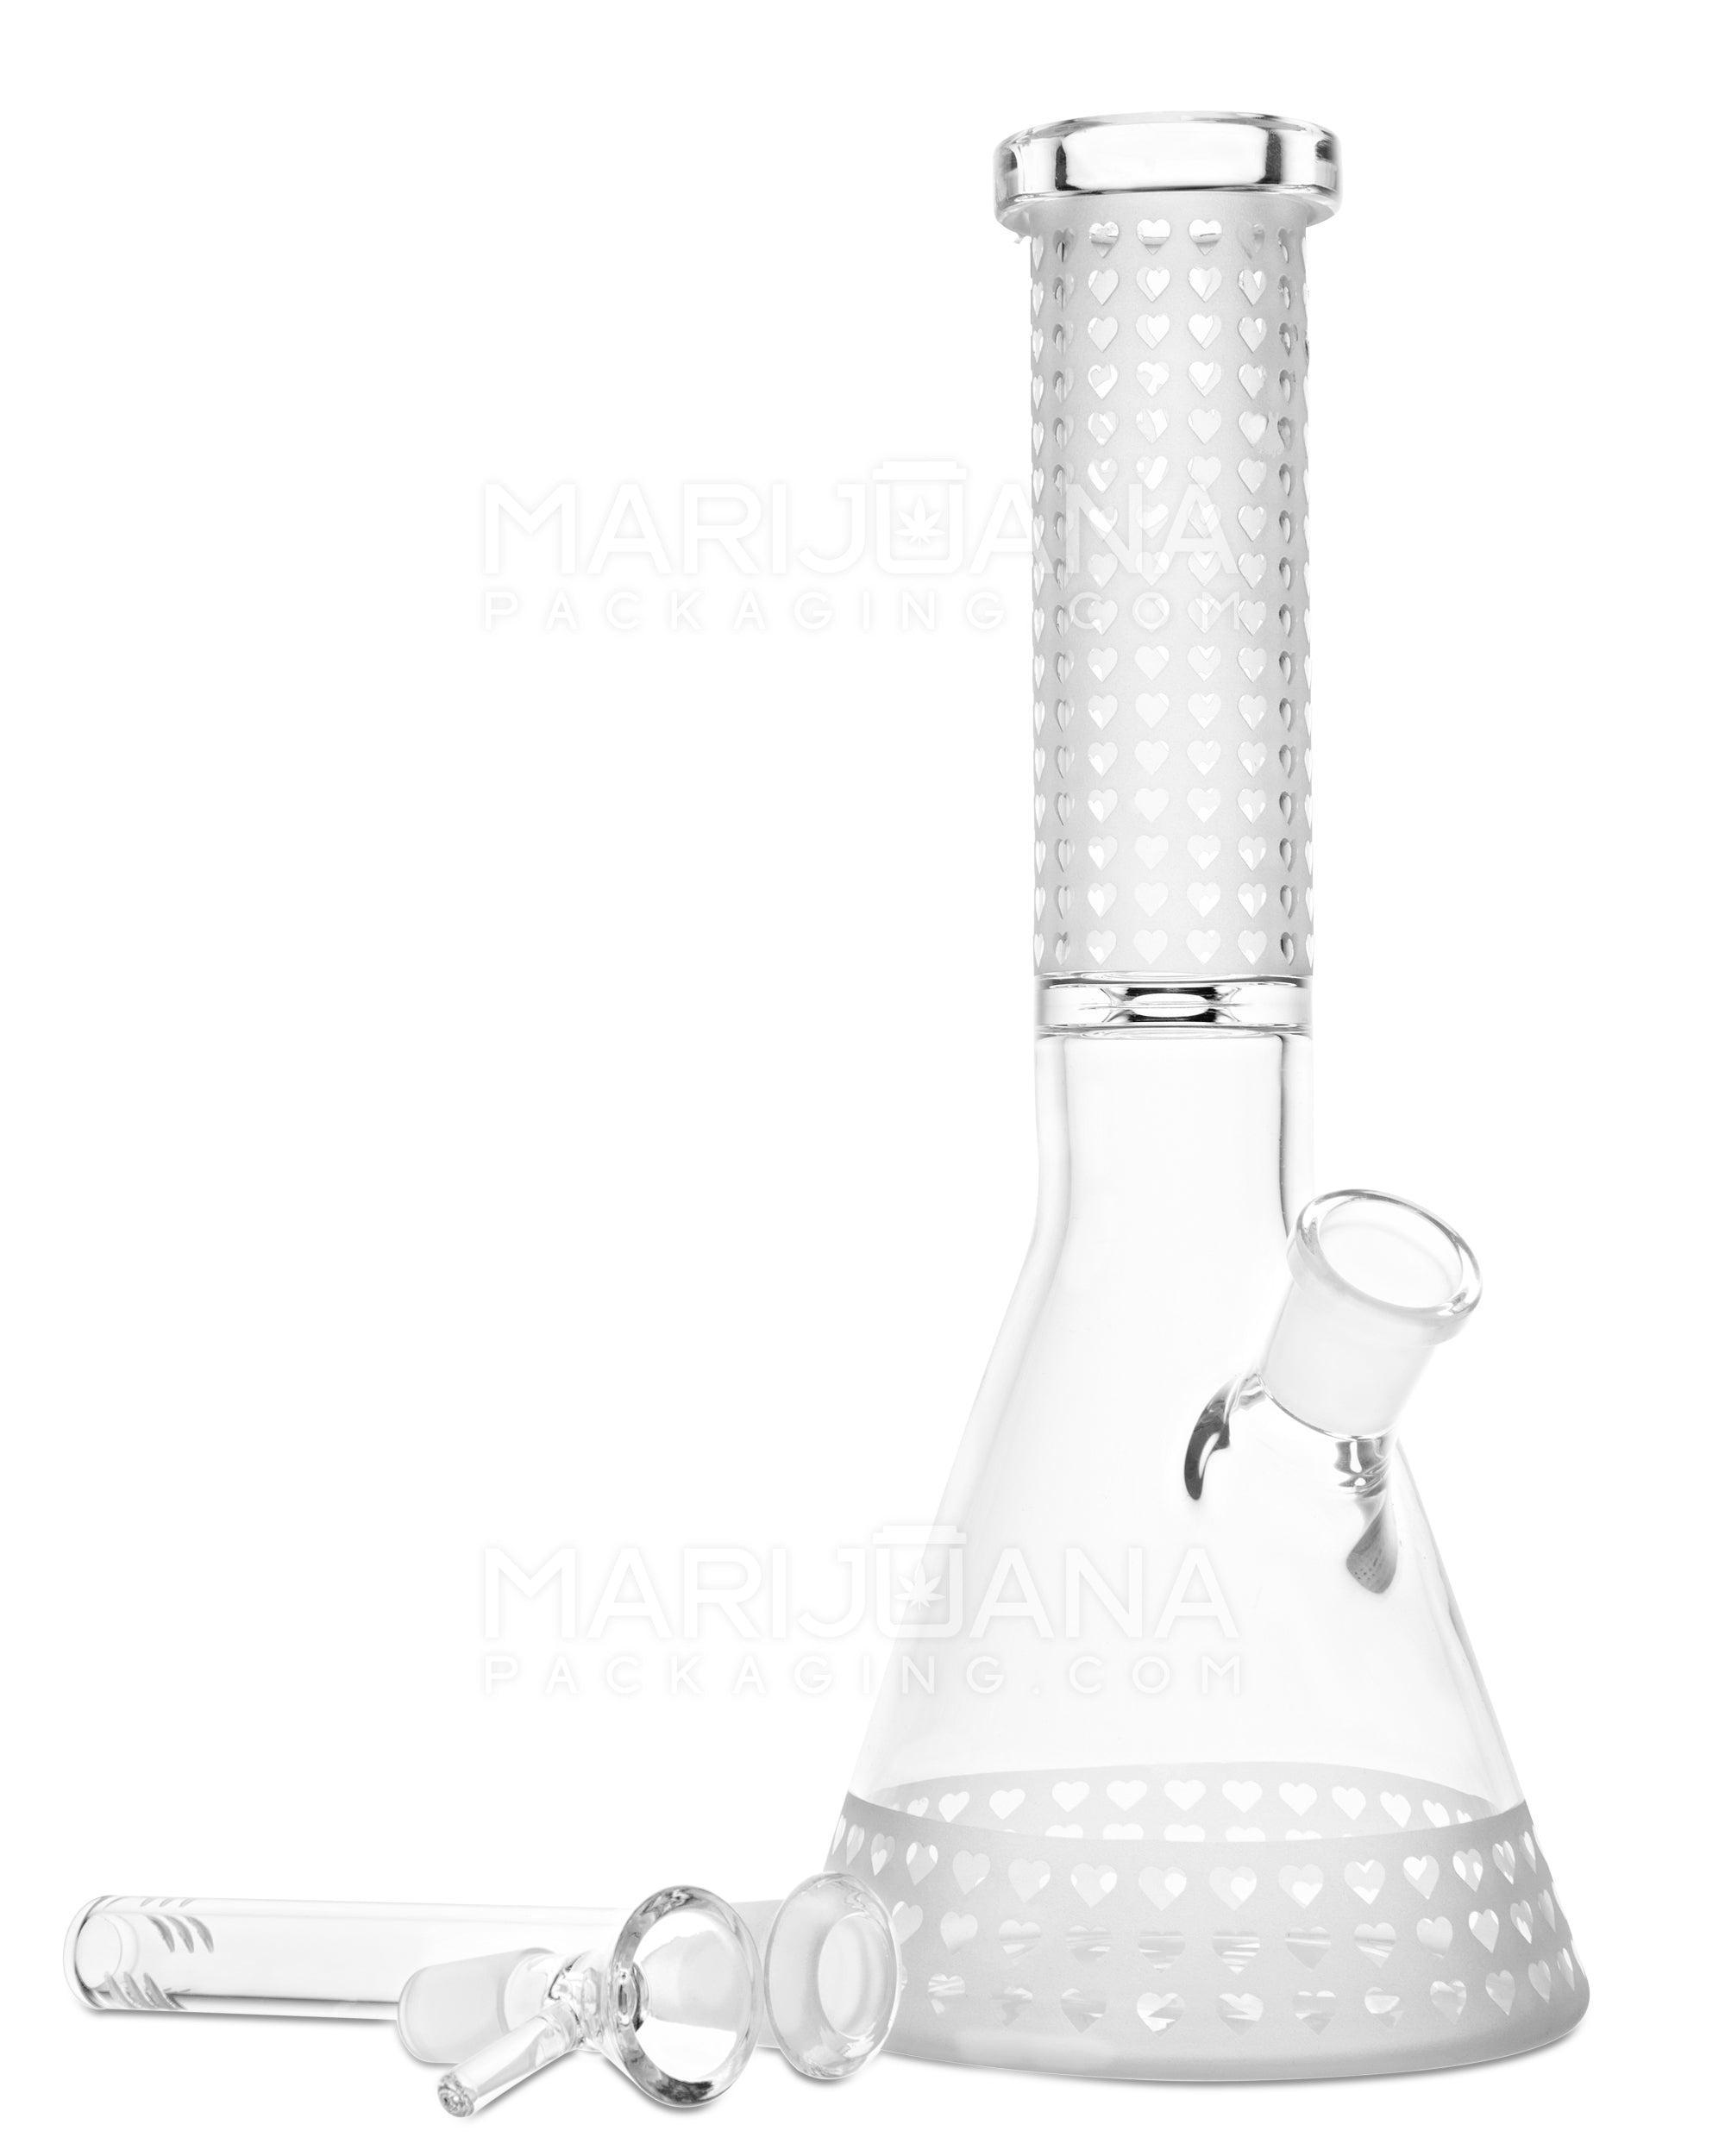 Straight Neck Sandblasted Hearts Decal Glass Beaker Water Pipe | 10.5in Tall - 14mm Bowl - Clear - 2